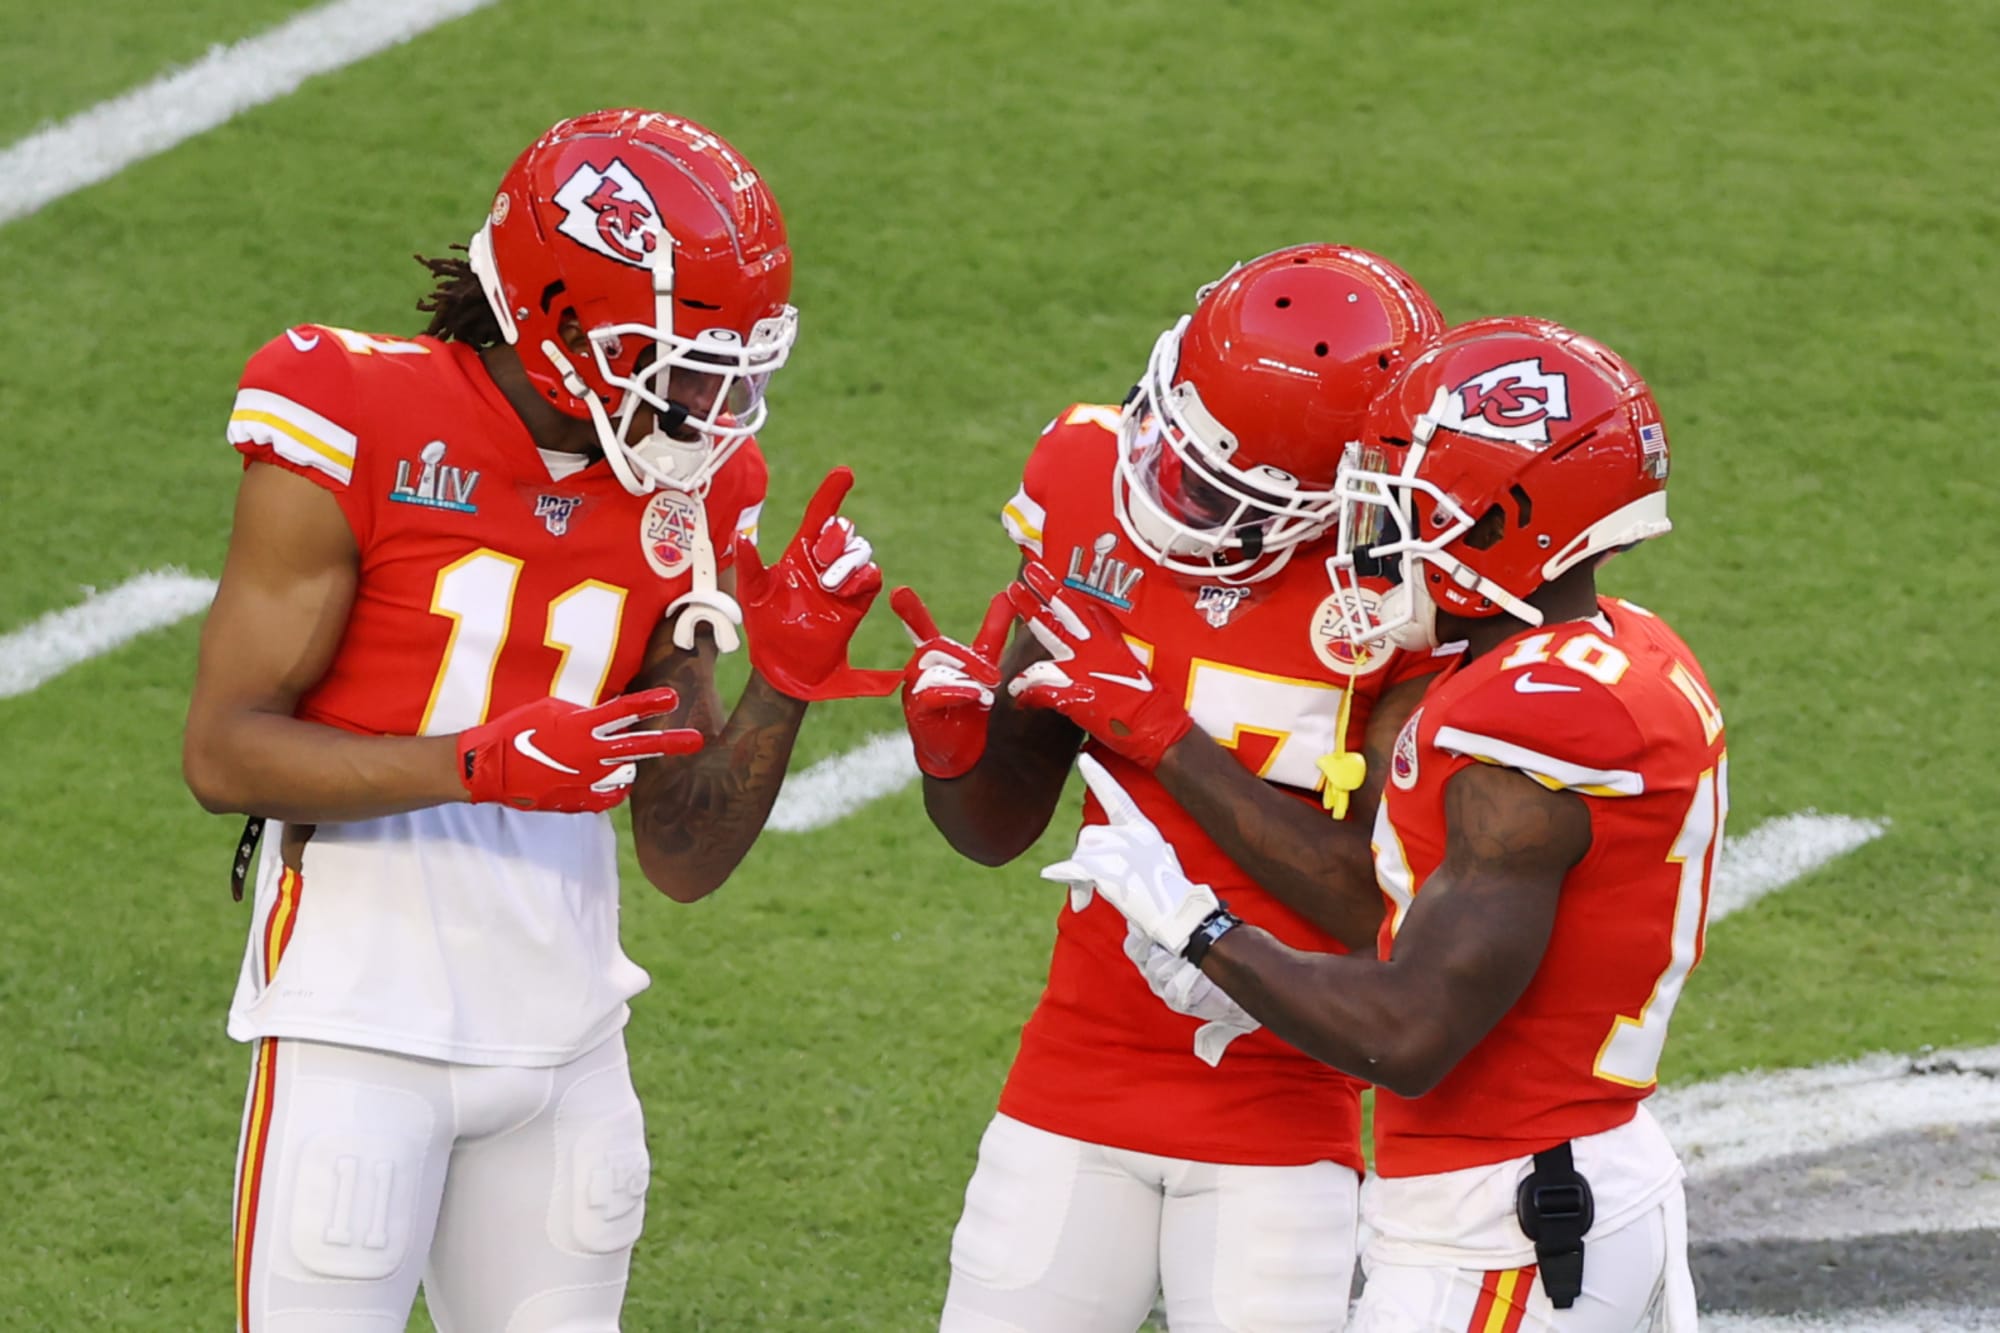 Tyreek Hill and Mecole Hardman are among fastest Madden 21 ratings